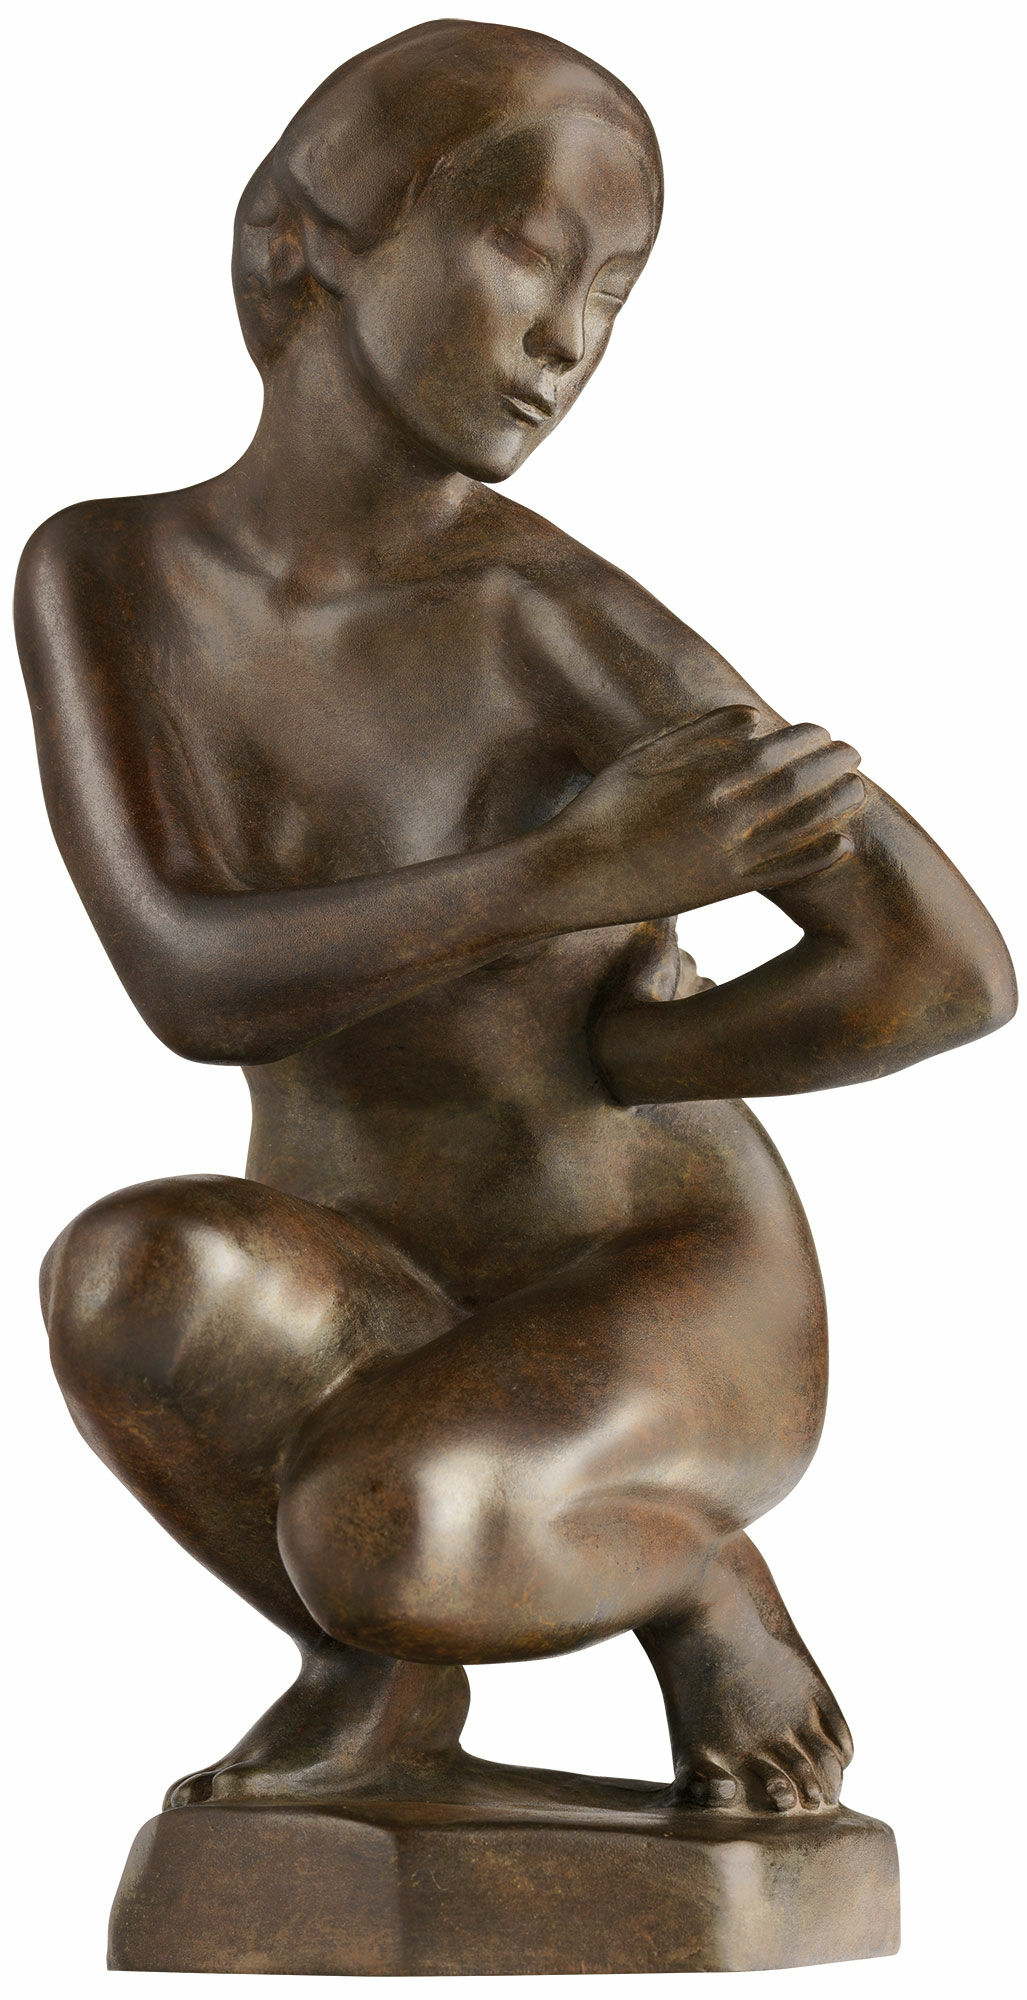 Sculpture "Crouching Japanese Woman", reduction in bronze by Georg Kolbe